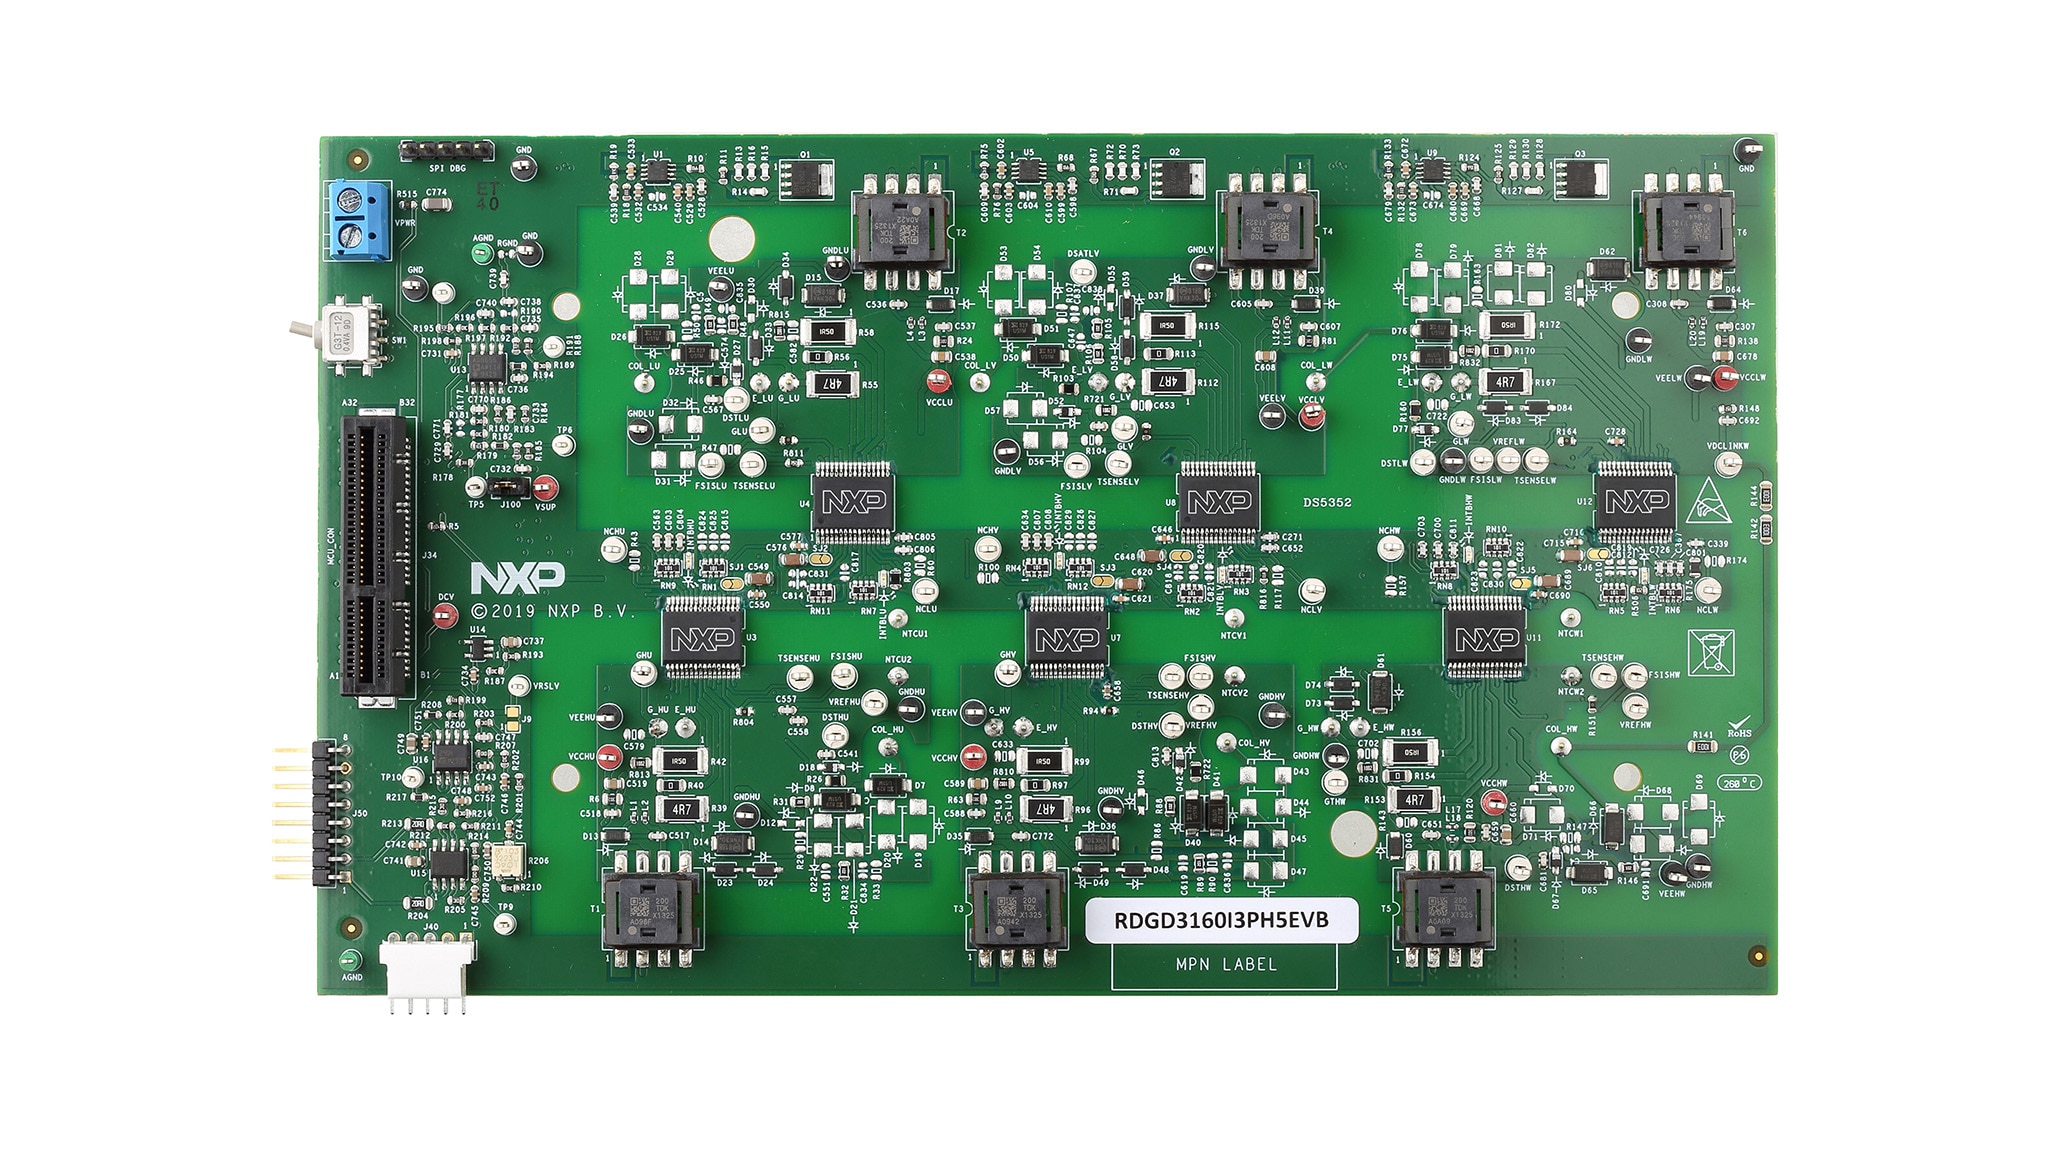 RDGD3160I3PH5EVB : 3 Phase Reference Design for HP Drive Featuring GD3160 thumbnail